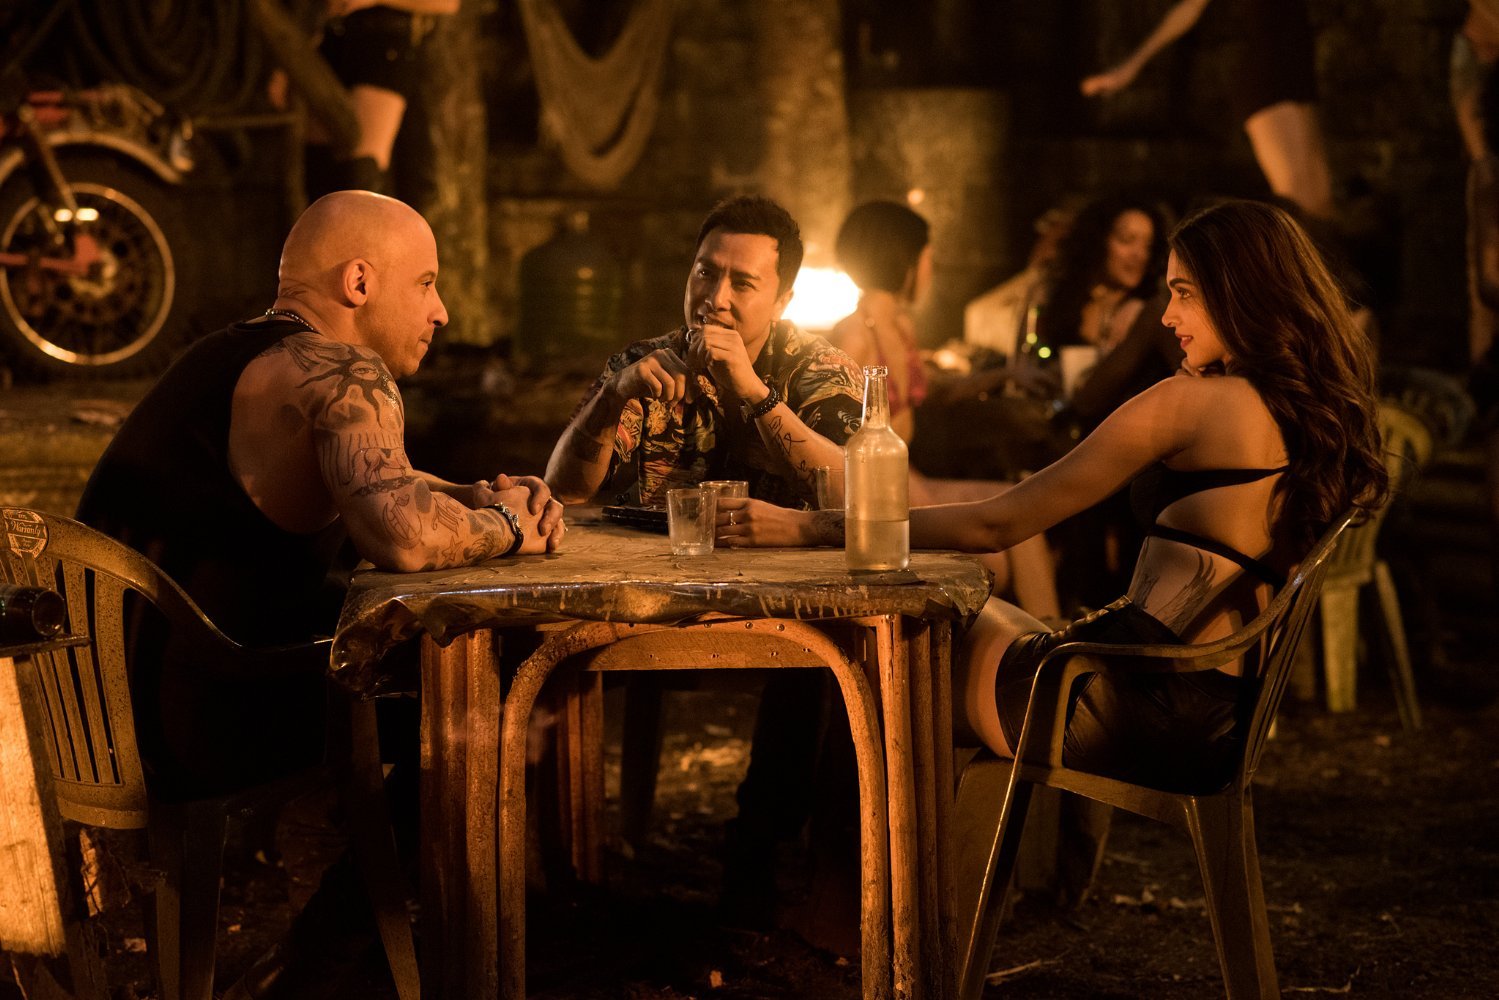 Xxx: The Return Of Xander Cage (Movie) Review 1